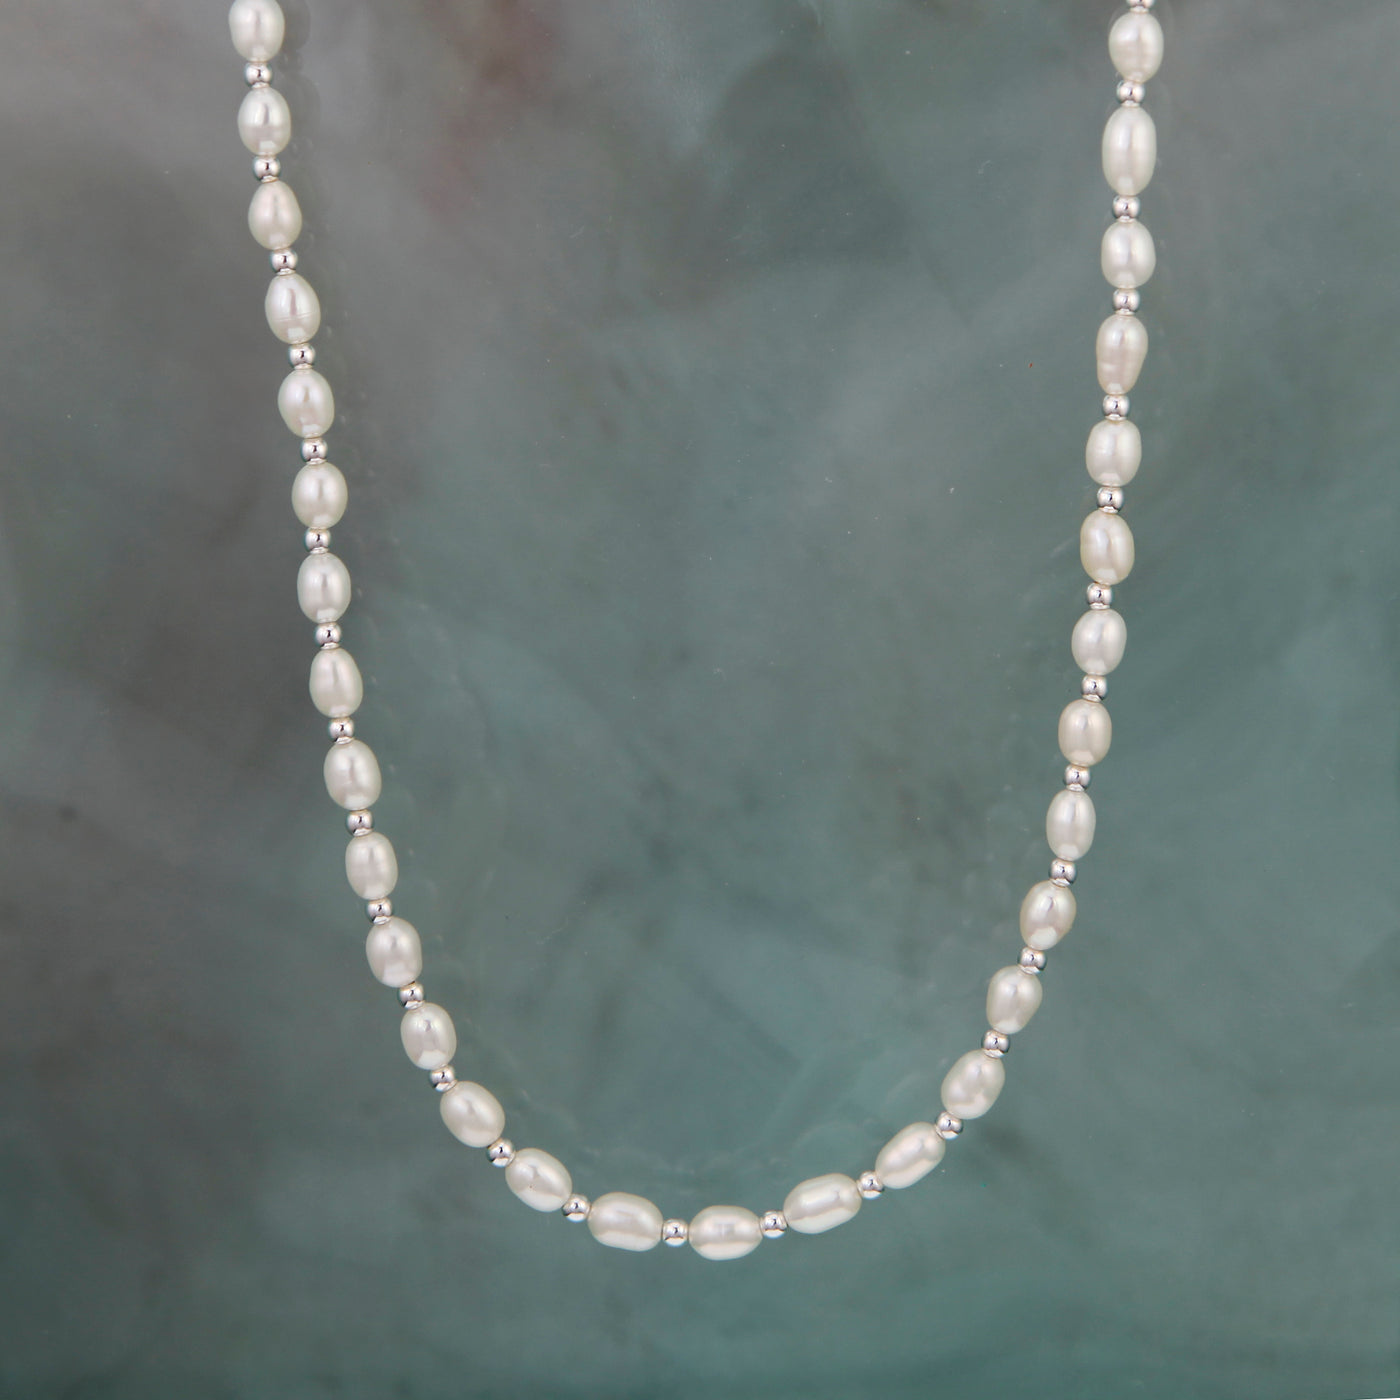 Photo of Freshwater Pearl Necklace With Silver Beads